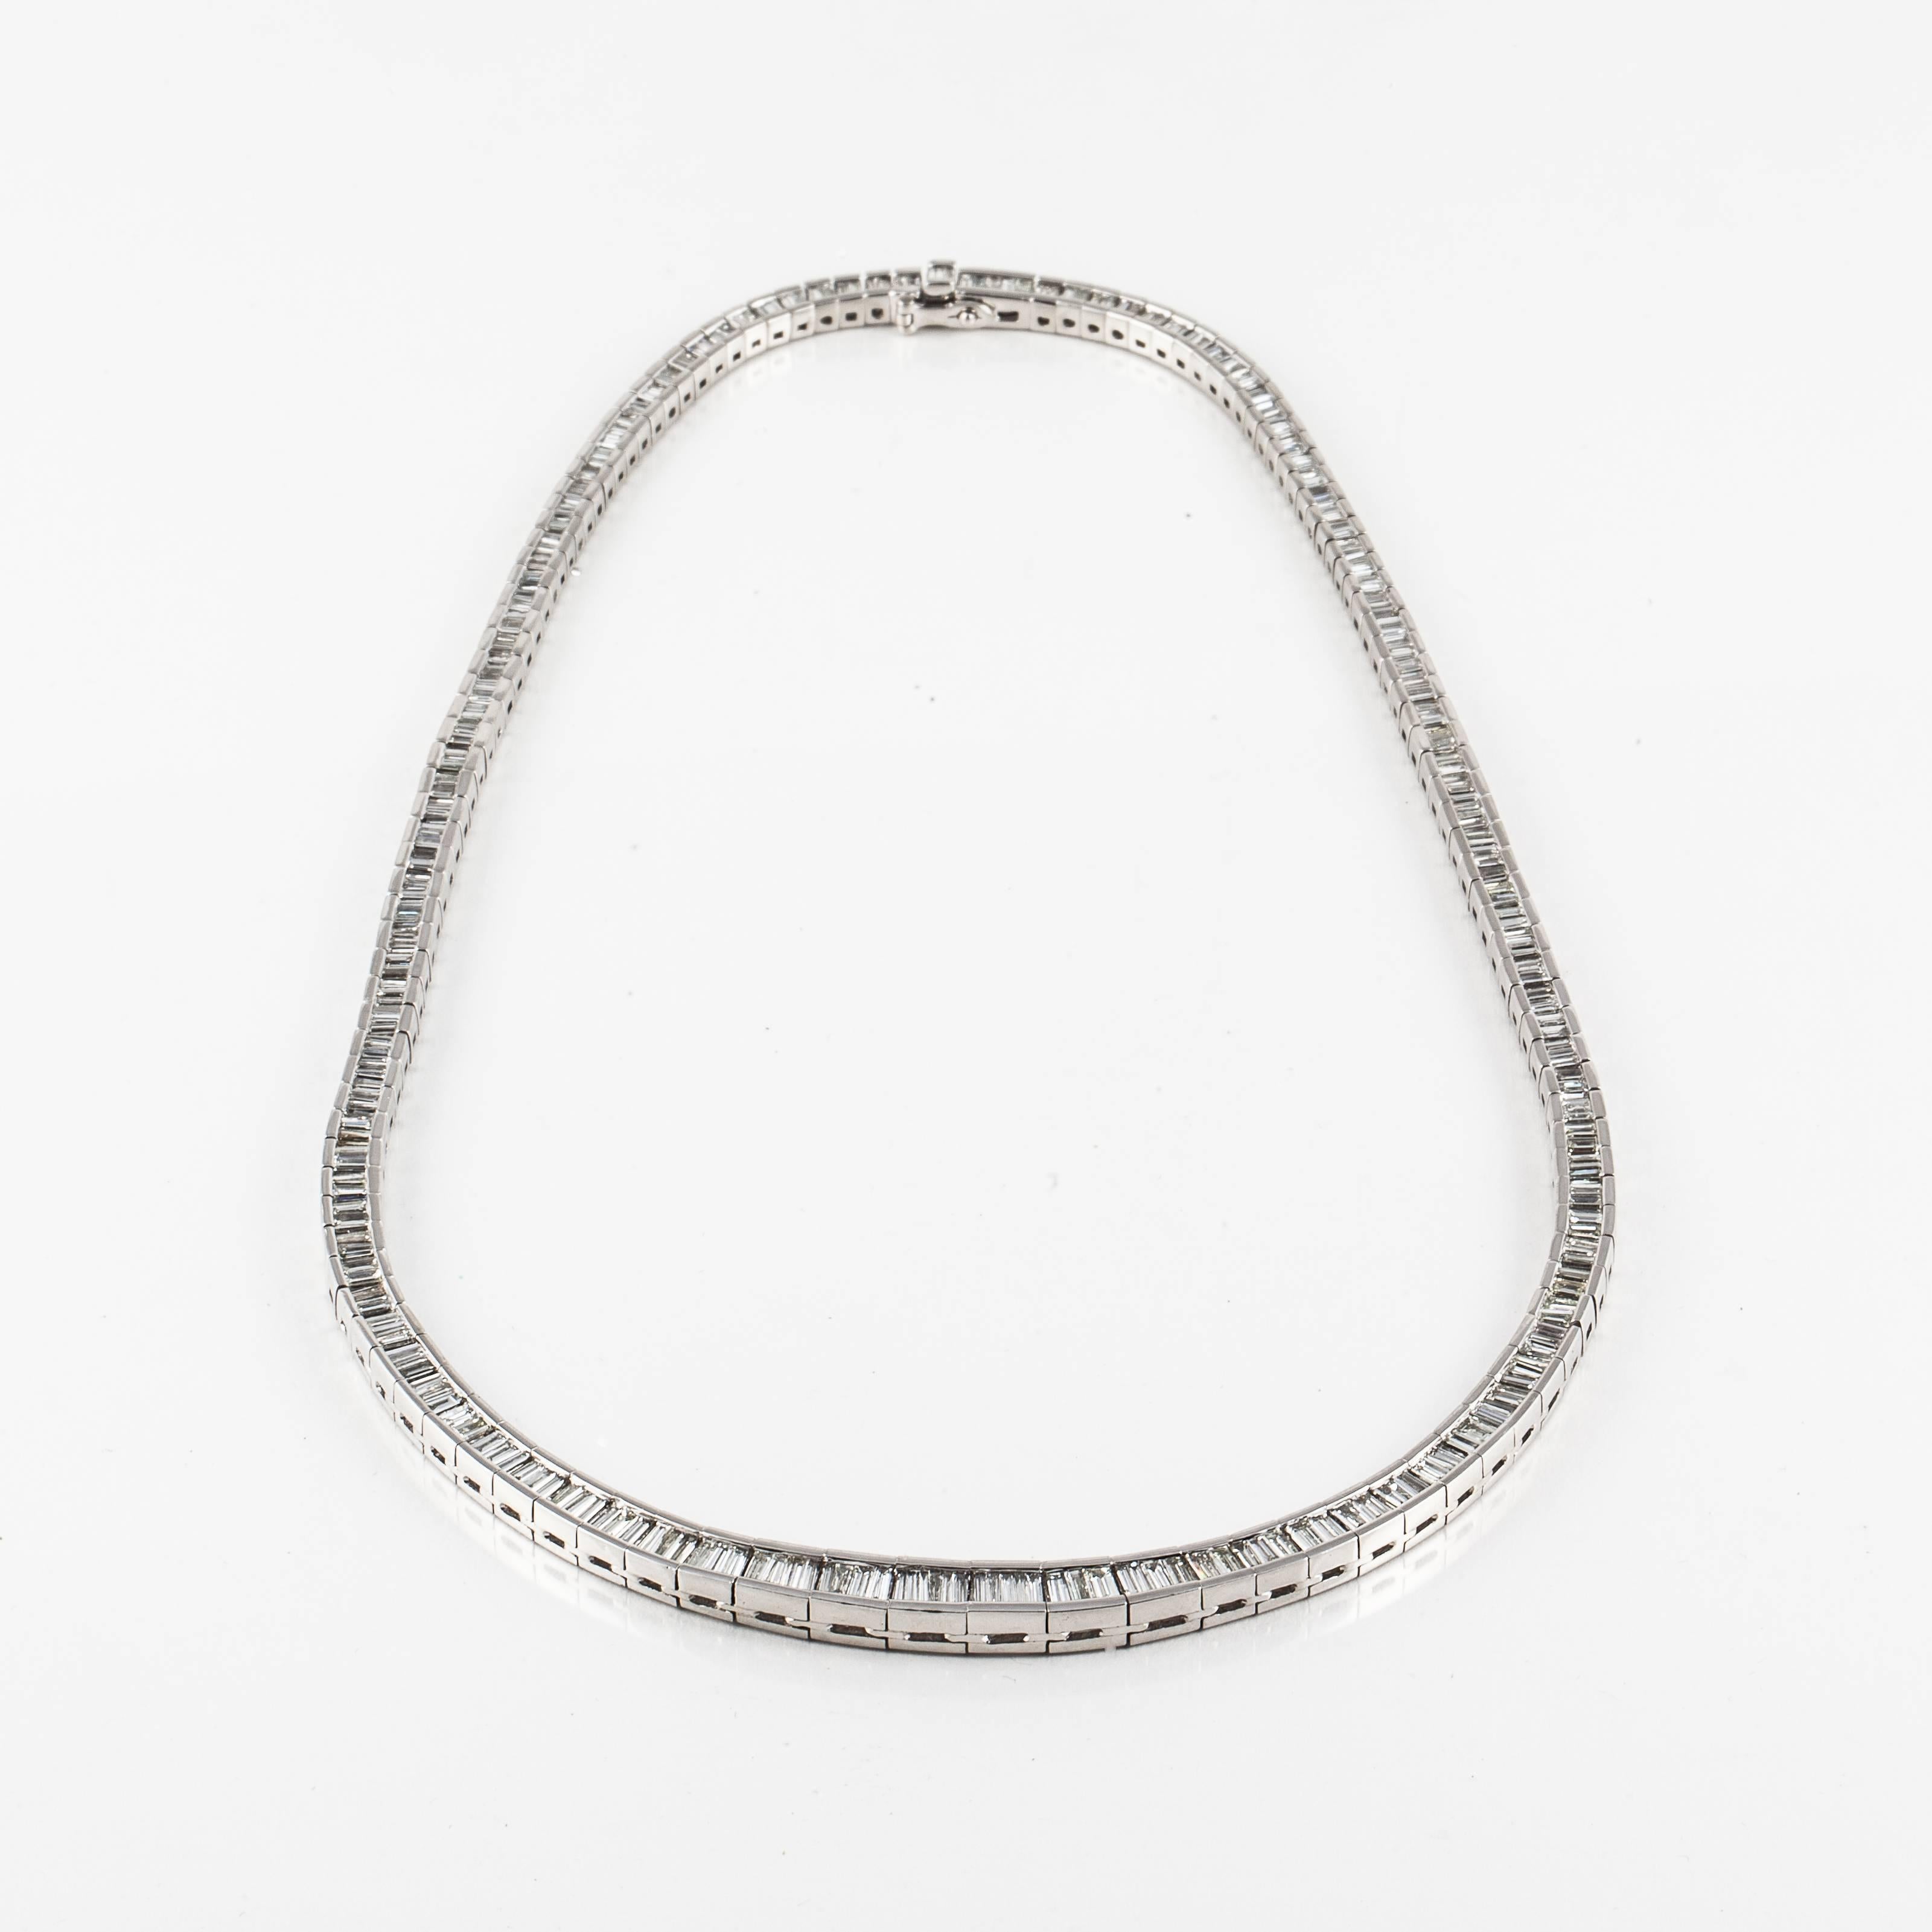 Riviera necklace composed of platinum with baguette diamonds.  The diamonds total 11.12 carats, G-H color and VS-SI clarity.  It measures 16 inches long and 1/4 inches wide at the bottom.  It has a tongue closure and figure eight safety.